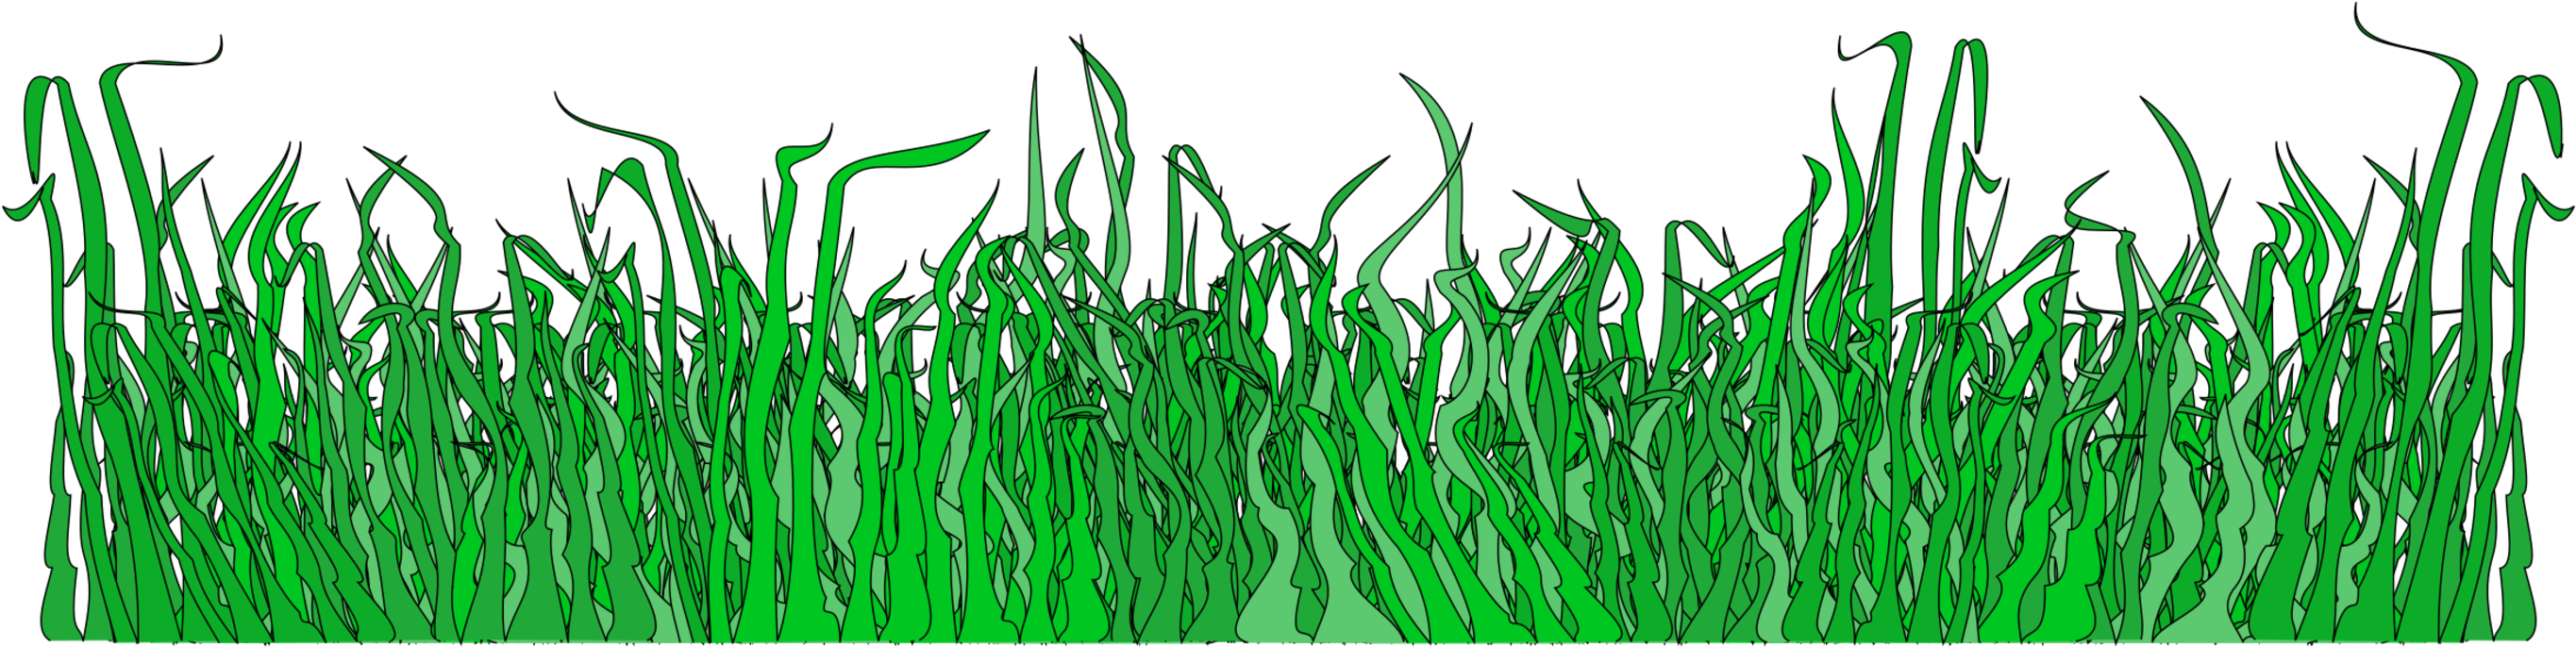 A Green Grass With Black Background